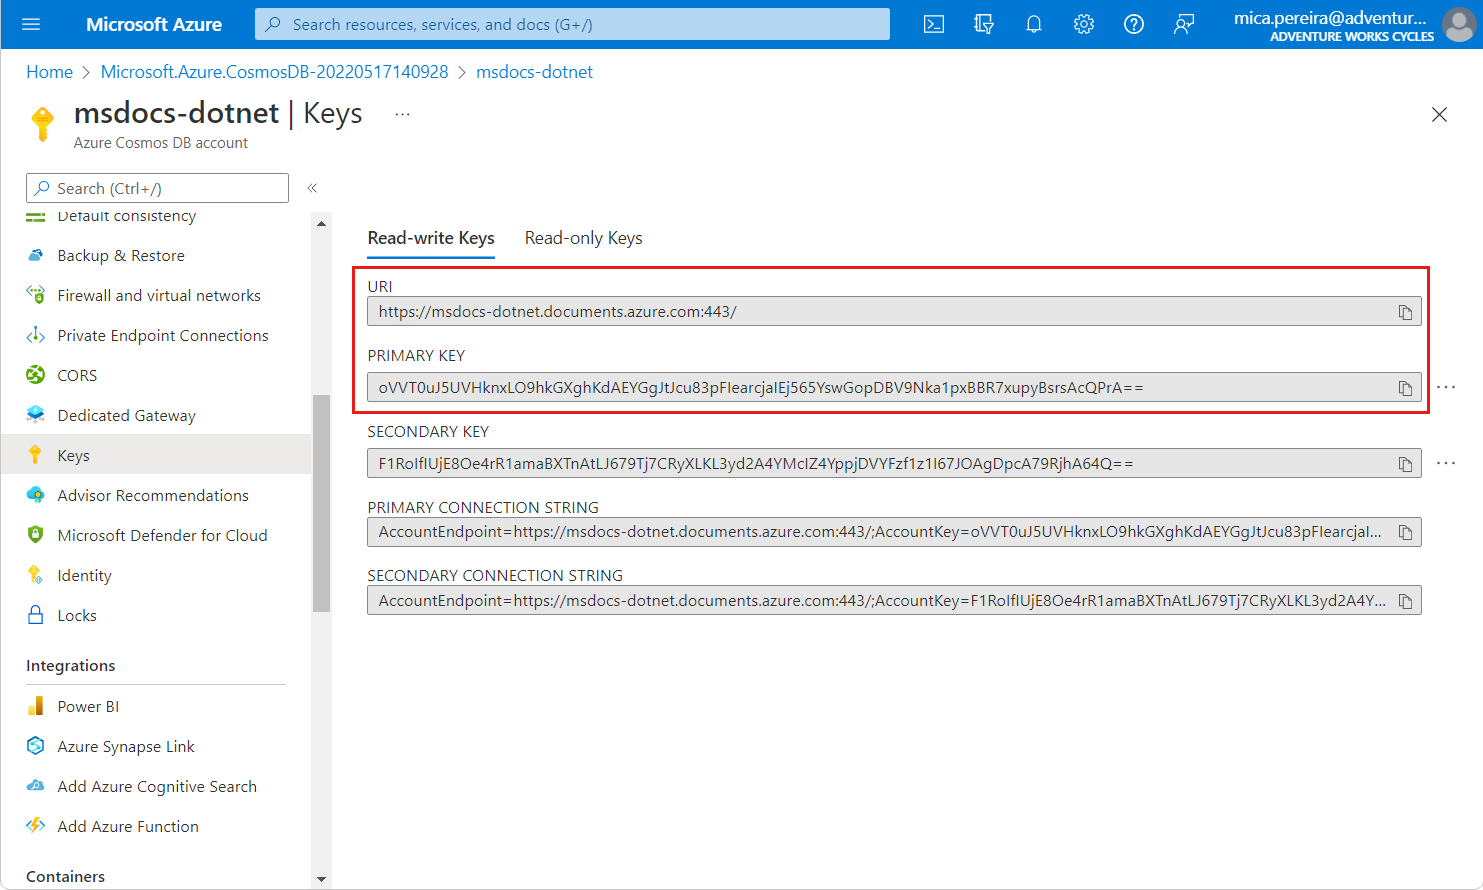 Screenshot of Keys page with various credentials for an Azure Cosmos D B SQL A P I account.